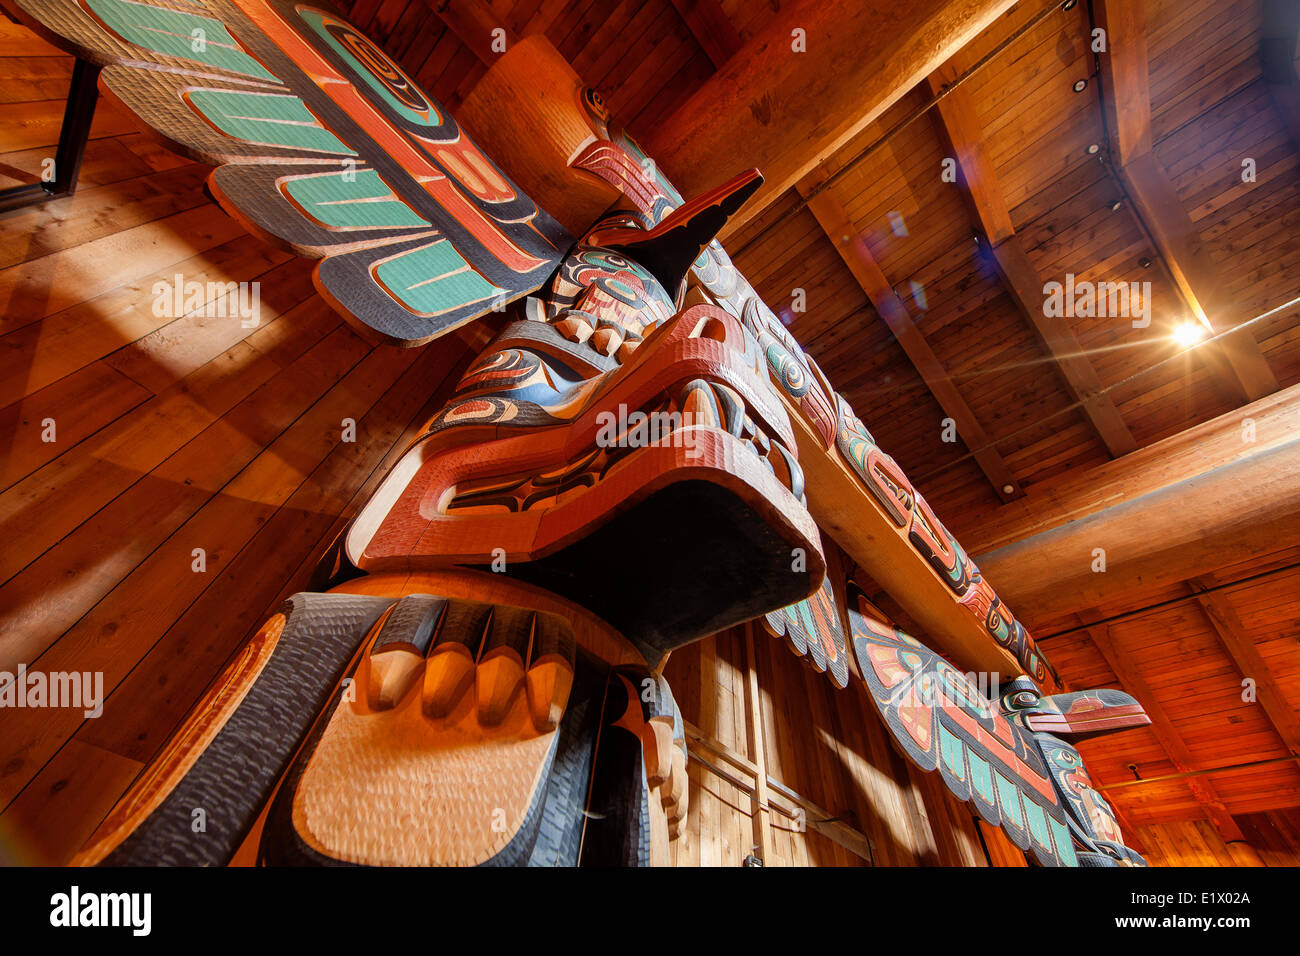 Beautifully carved totem poles traditional first nations architecture greet visitors to the big house at Klemtu.  Klemtu The Stock Photo